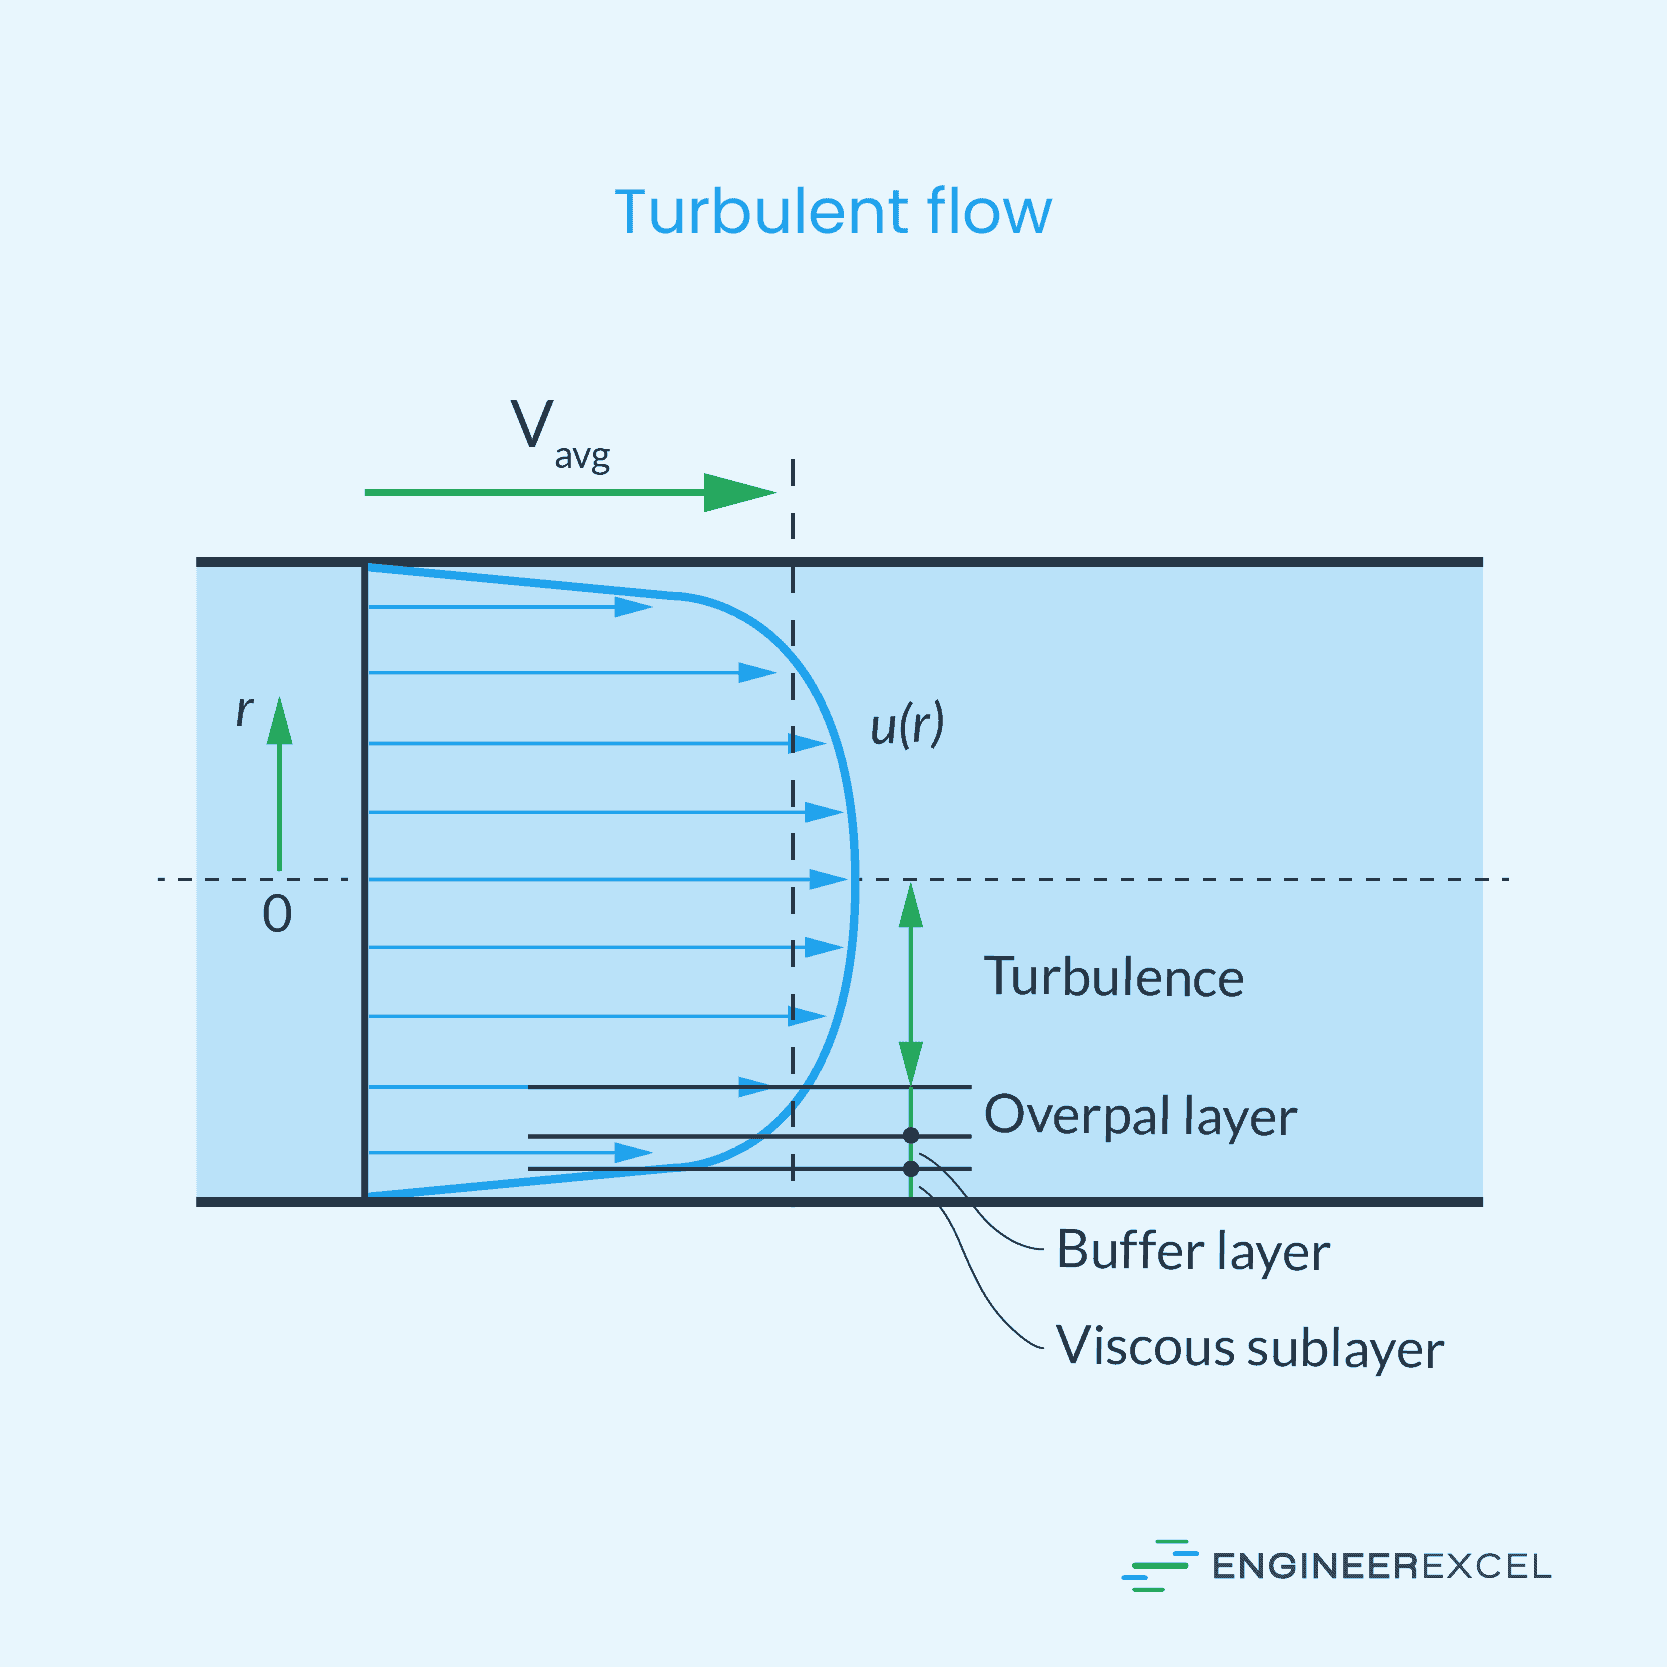 Water velocity profile for turbulent flow